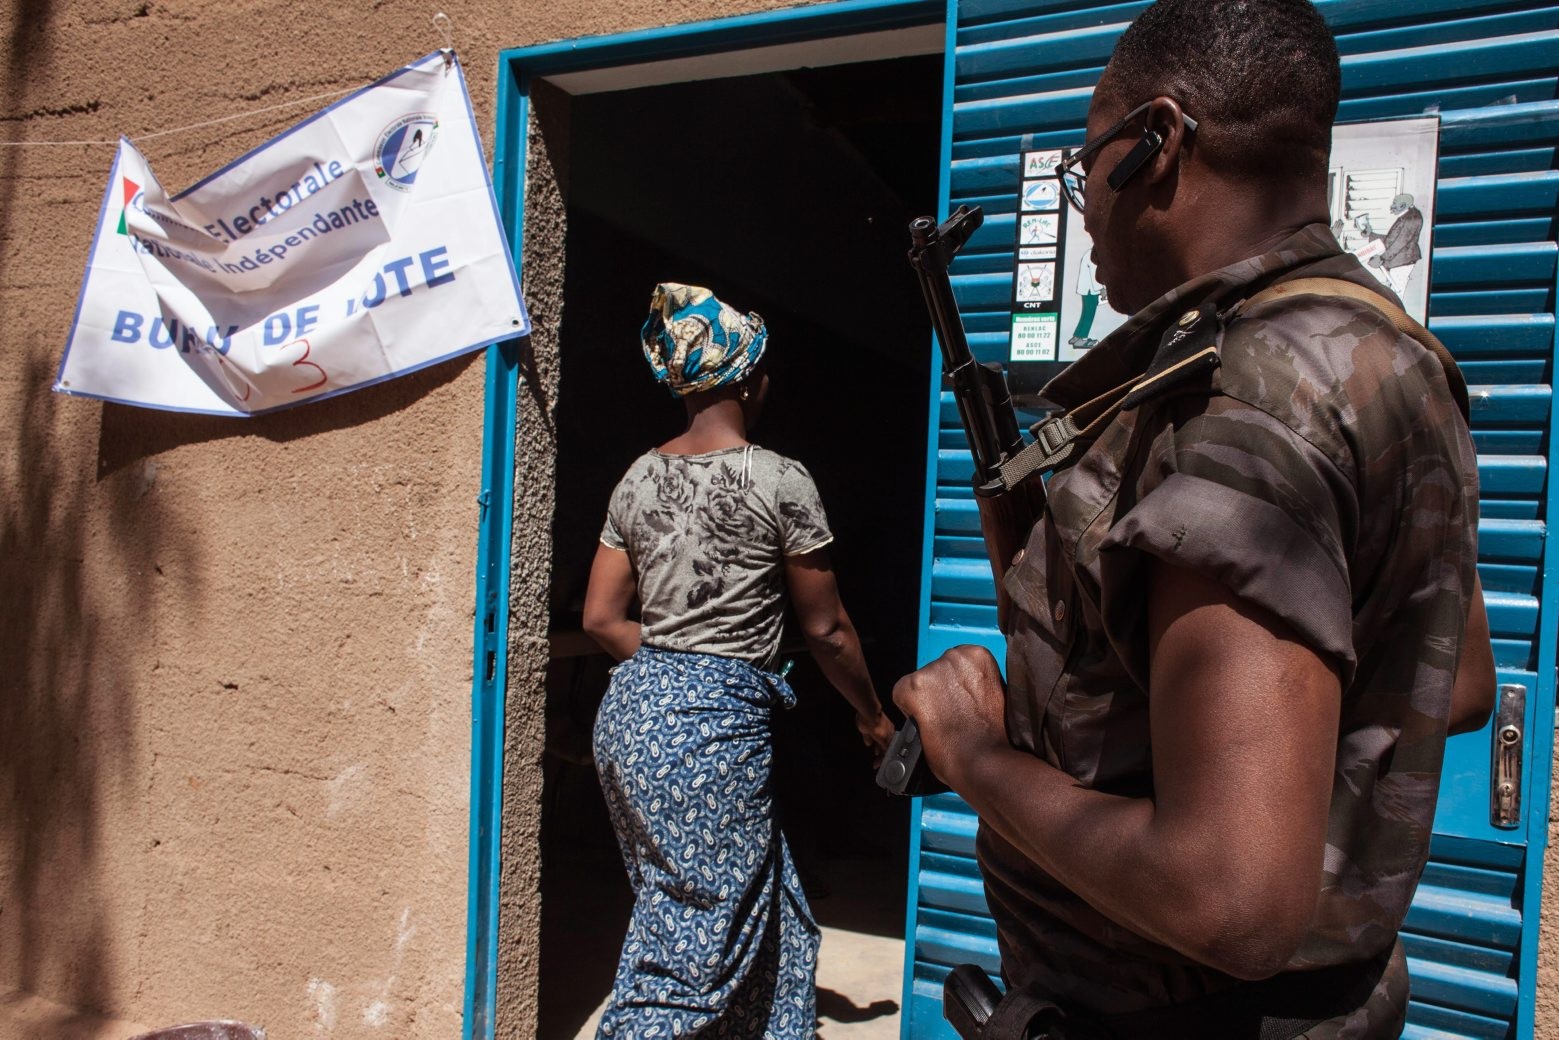 A Burkina Faso troop, right, provides security outside a polling station, as a woman voter enters the station to cast her ballot during elections in Ouagadougou, Burkina Faso, Sunday, Nov. 29, 2015. Hundreds of voters lined up after morning prayers to vote Sunday in Burkina Faso's first presidential and legislative elections since a popular uprising toppled the West Africa nation's longtime leader last year.(AP Photo/Theo Renaut) Burkina Faso Election